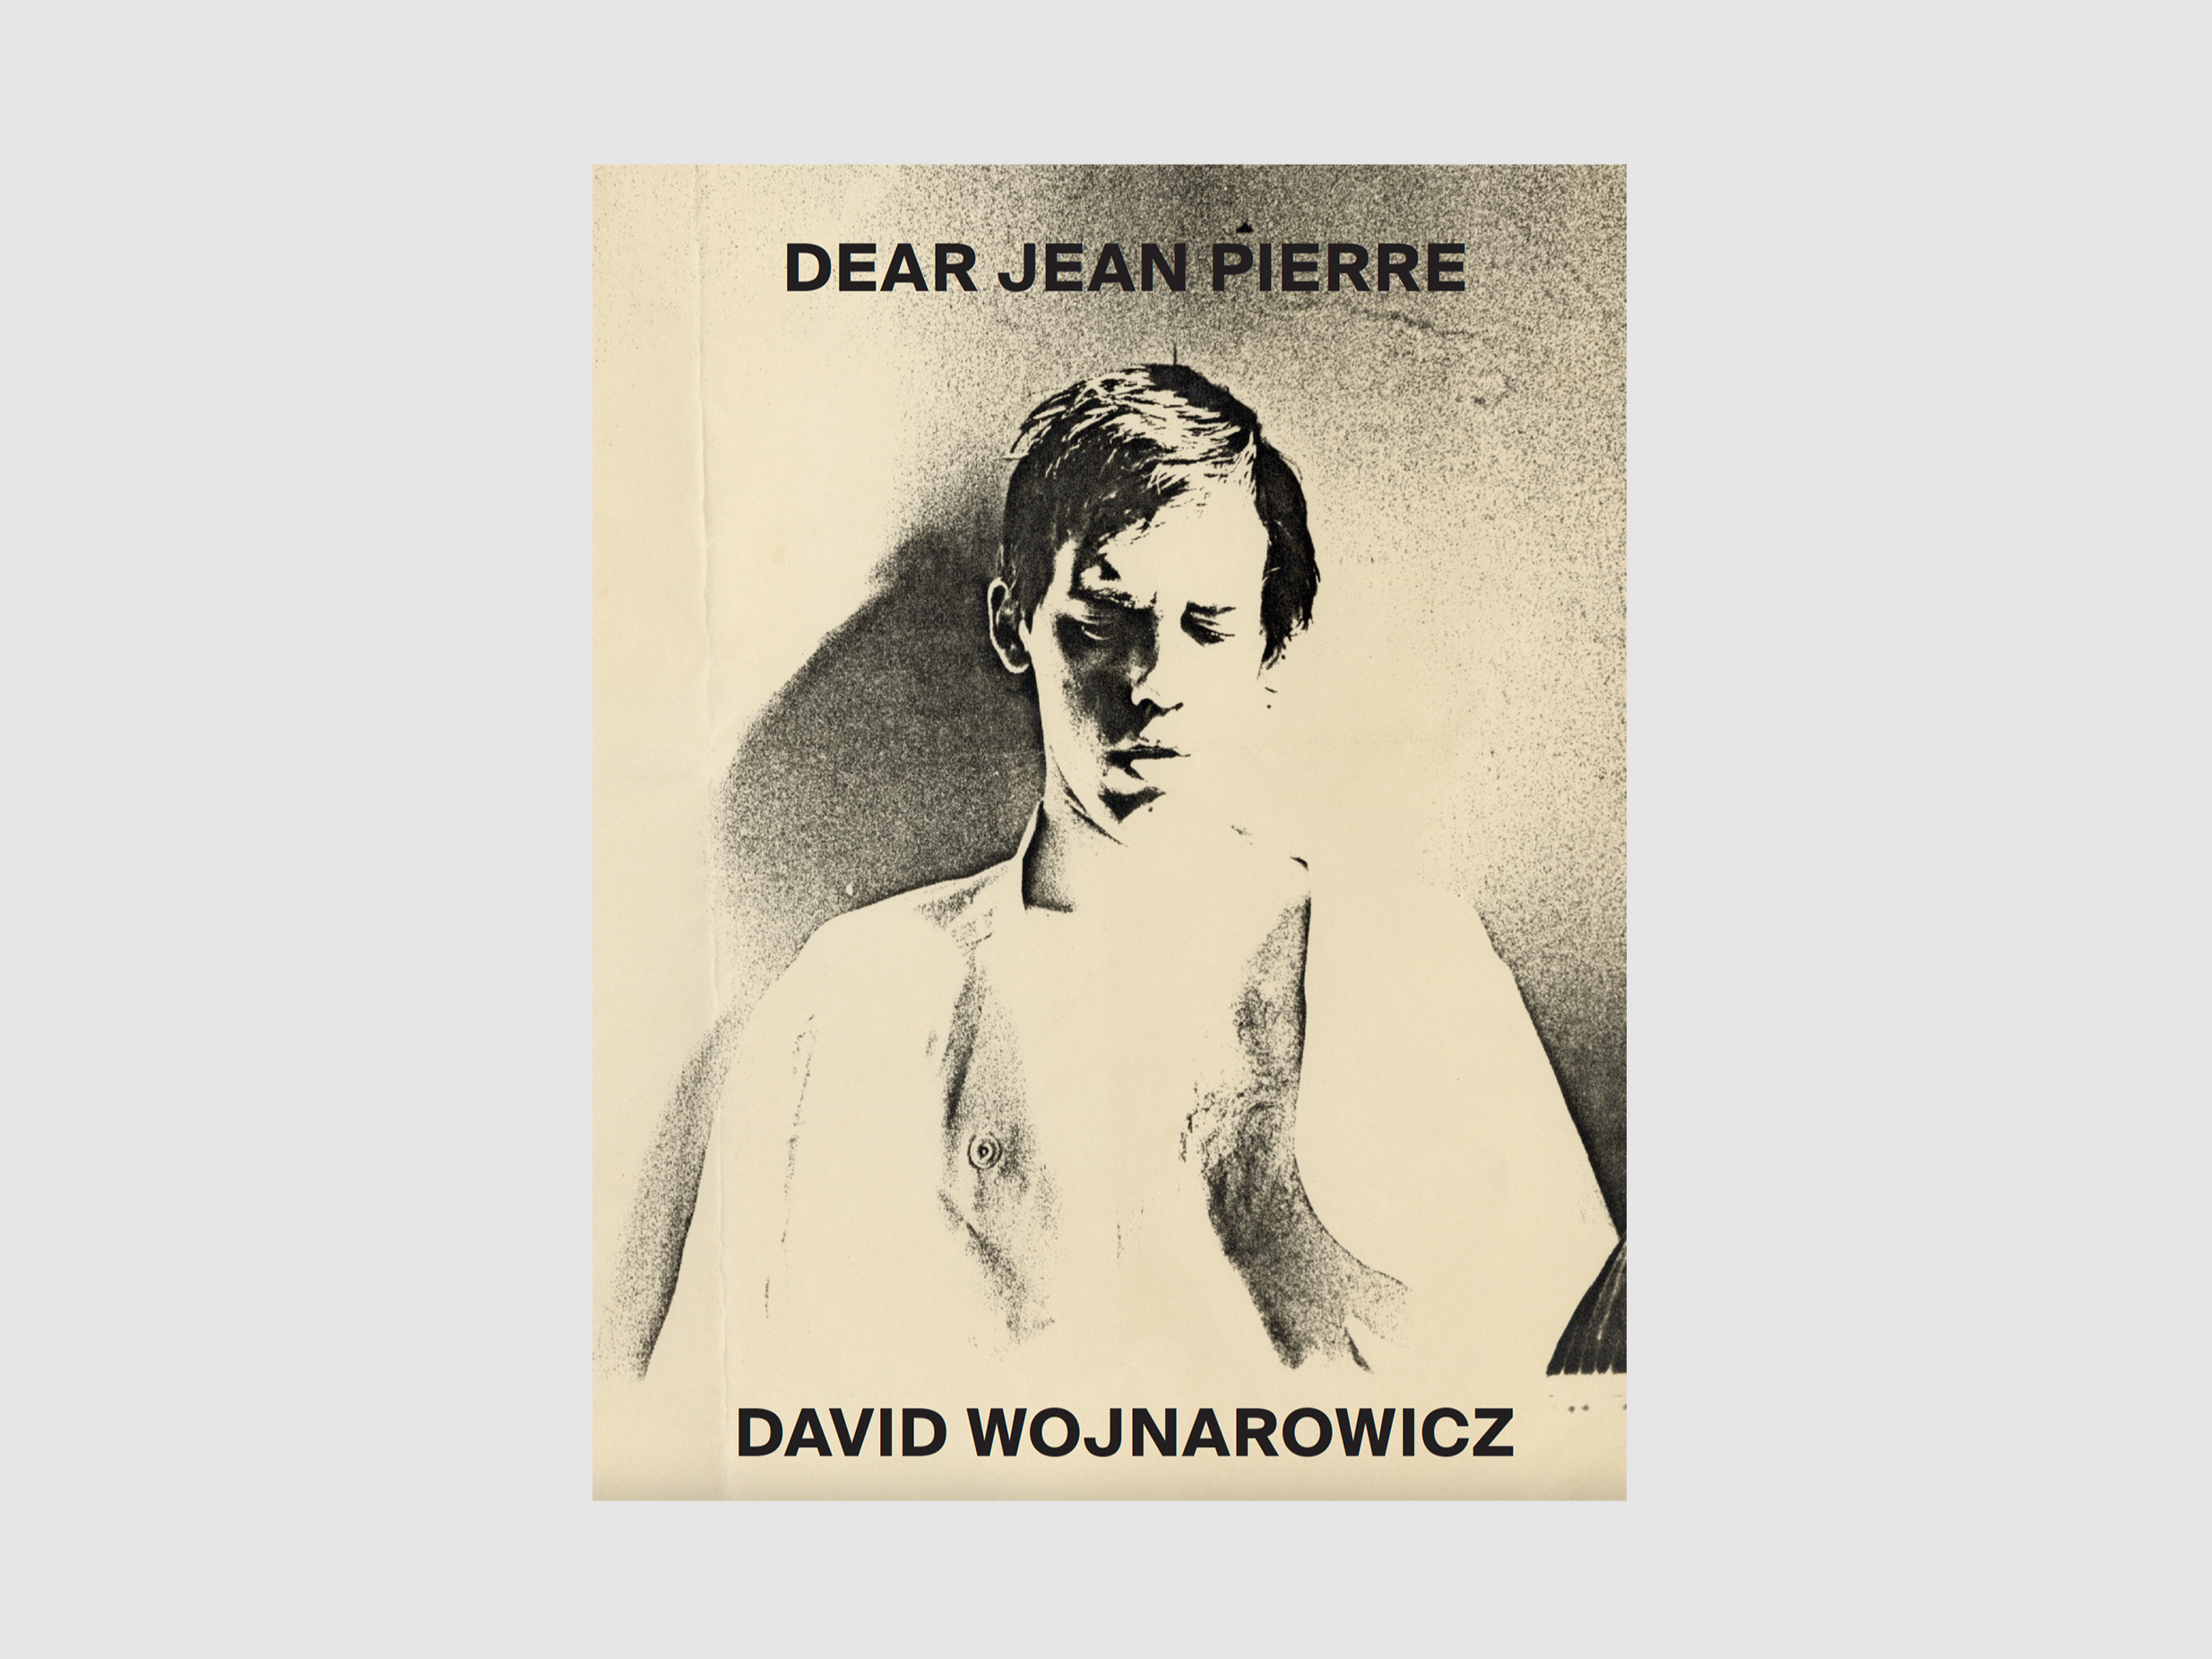 An image of the artist, David Wojnarowicz, is rendered in tan and black on a book cover. The title of the book and the artist's name sit at the top and bottom of the cover. 